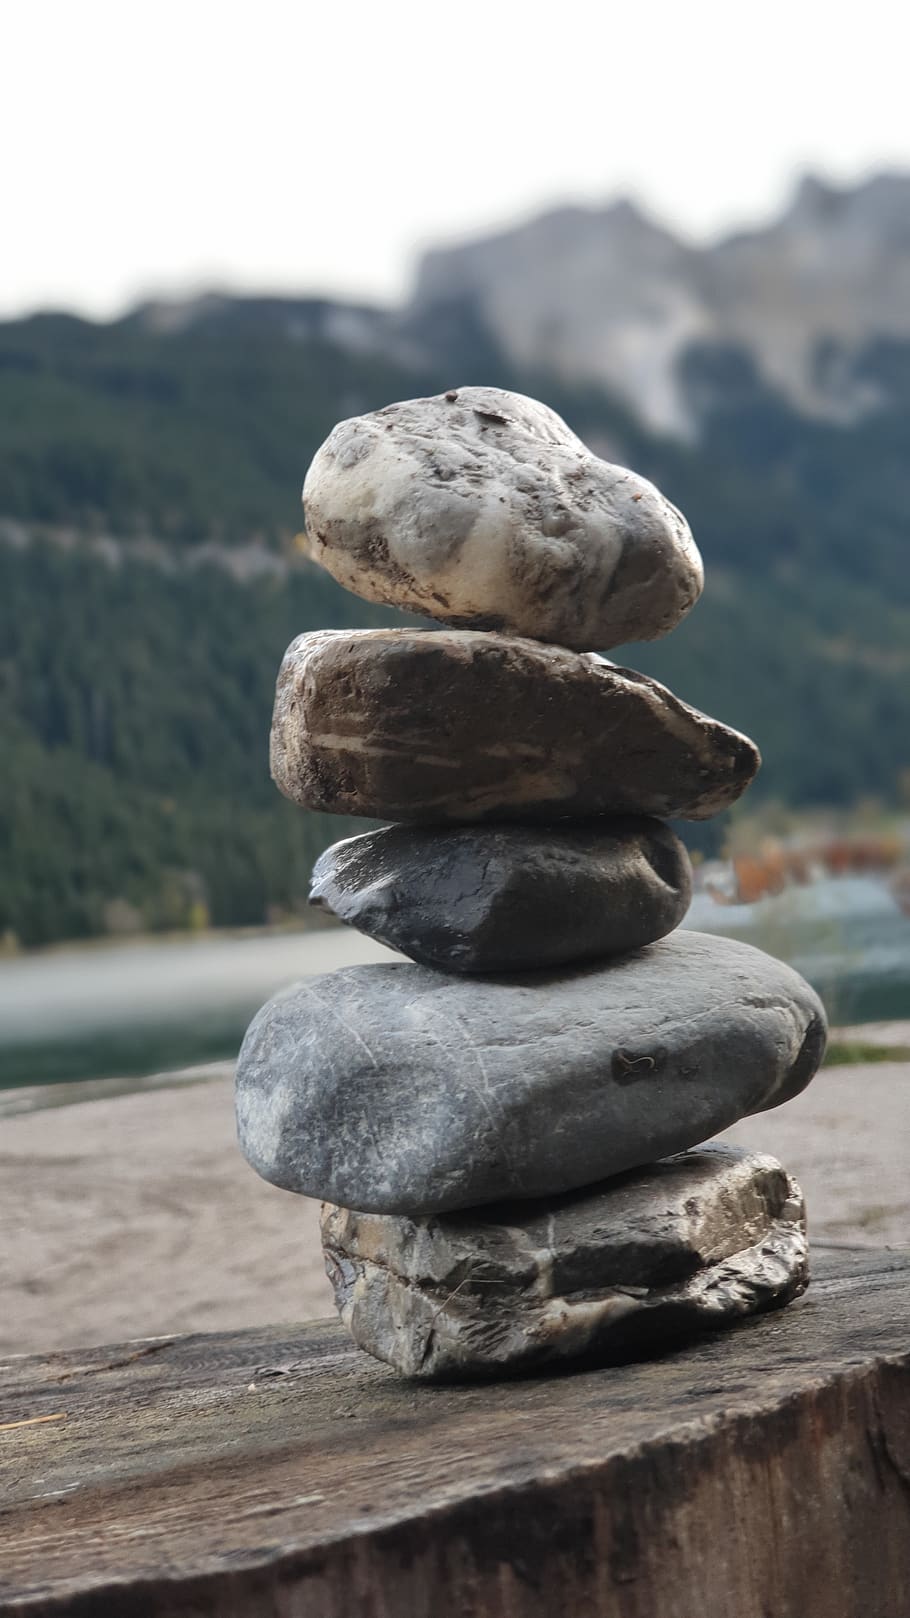 pebbles, cairn, stones, rest, meditation, balance, focus on foreground, close-up, day, stack